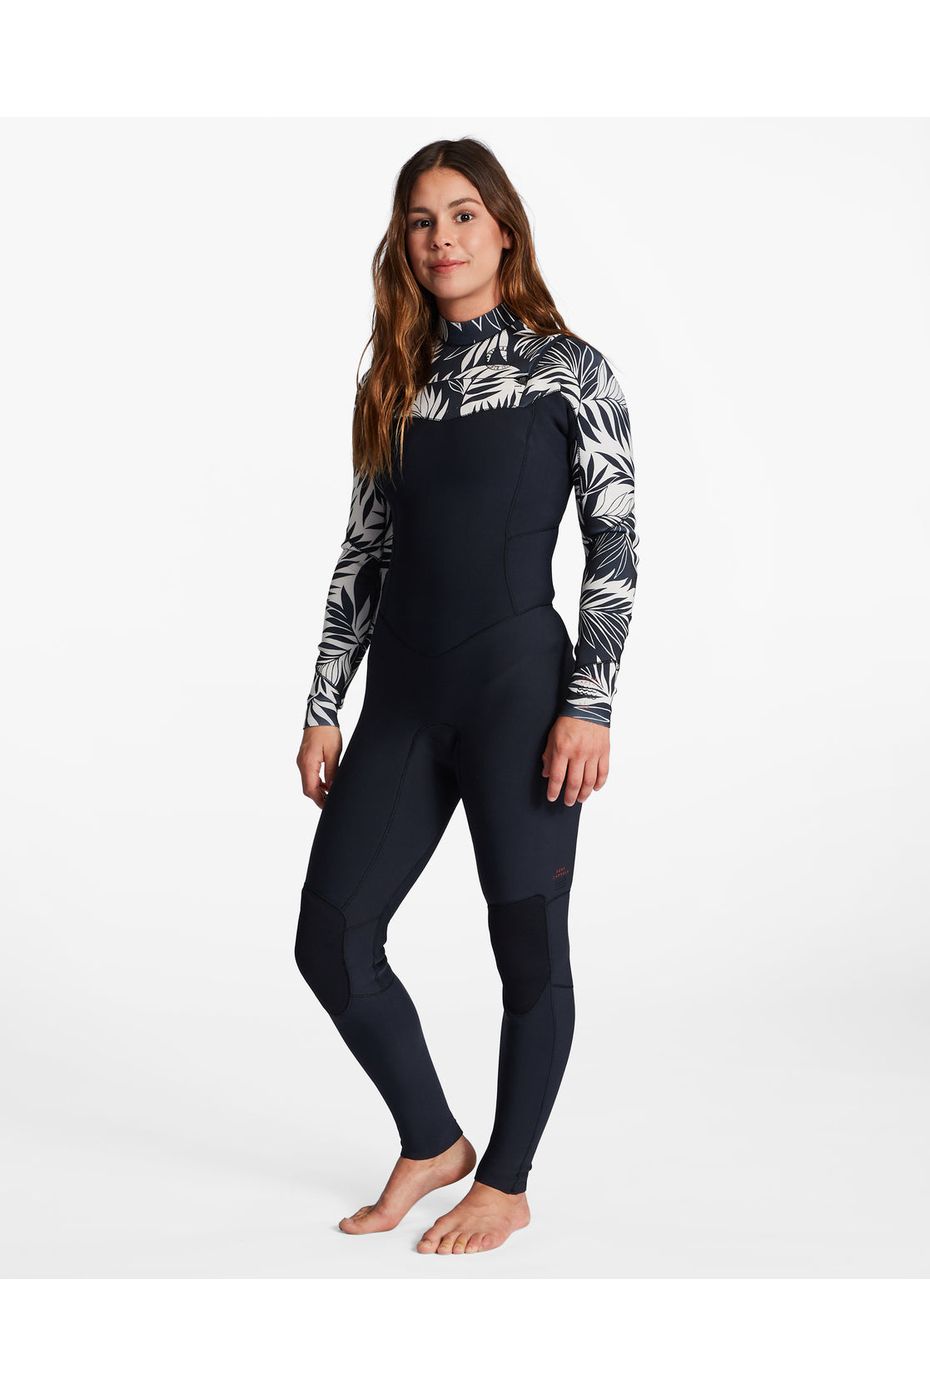 Billabong 4/3 Salty Dayz Wetsuit In Paradise